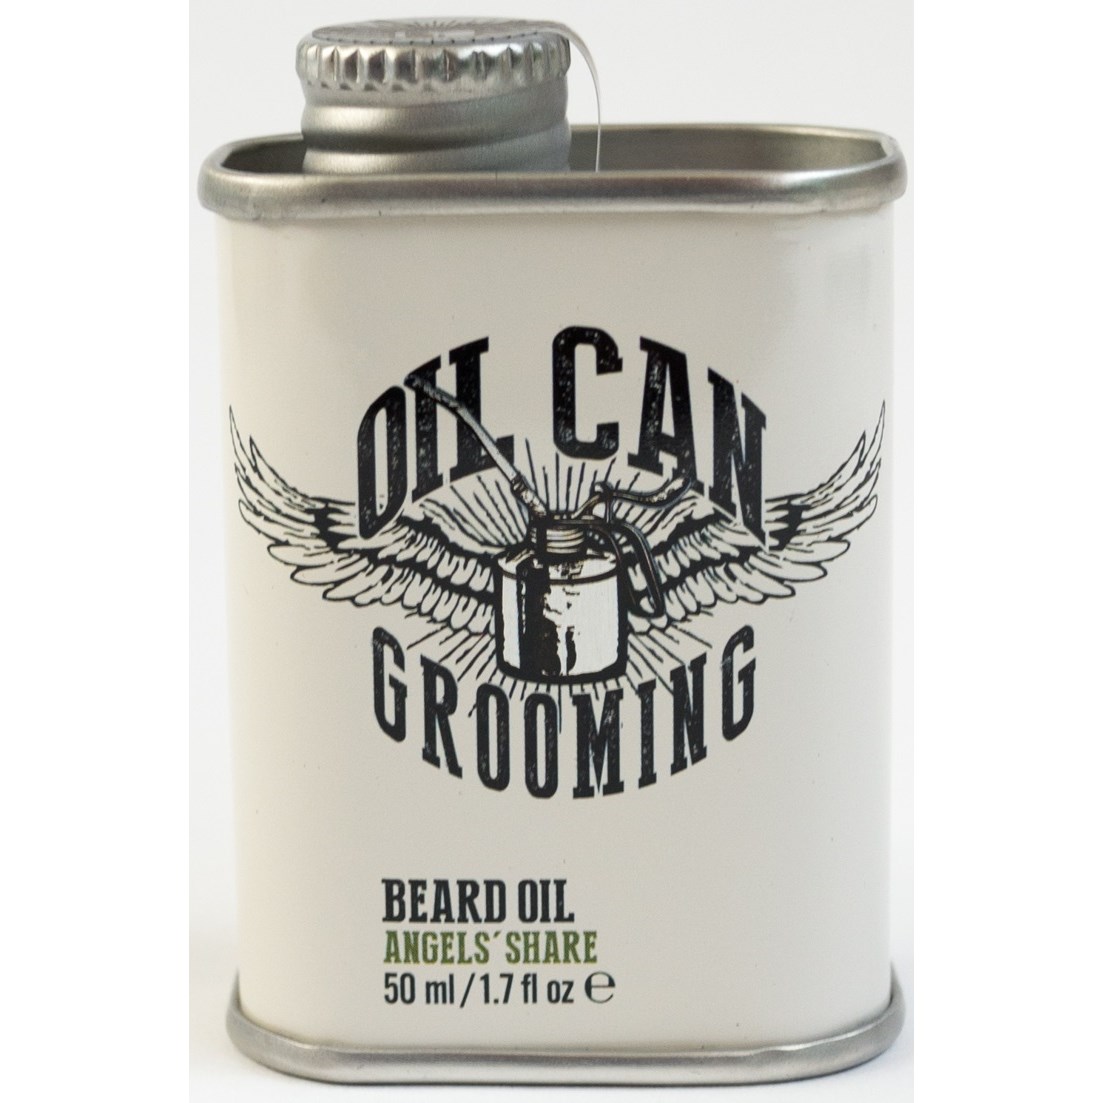 Oil Can Grooming